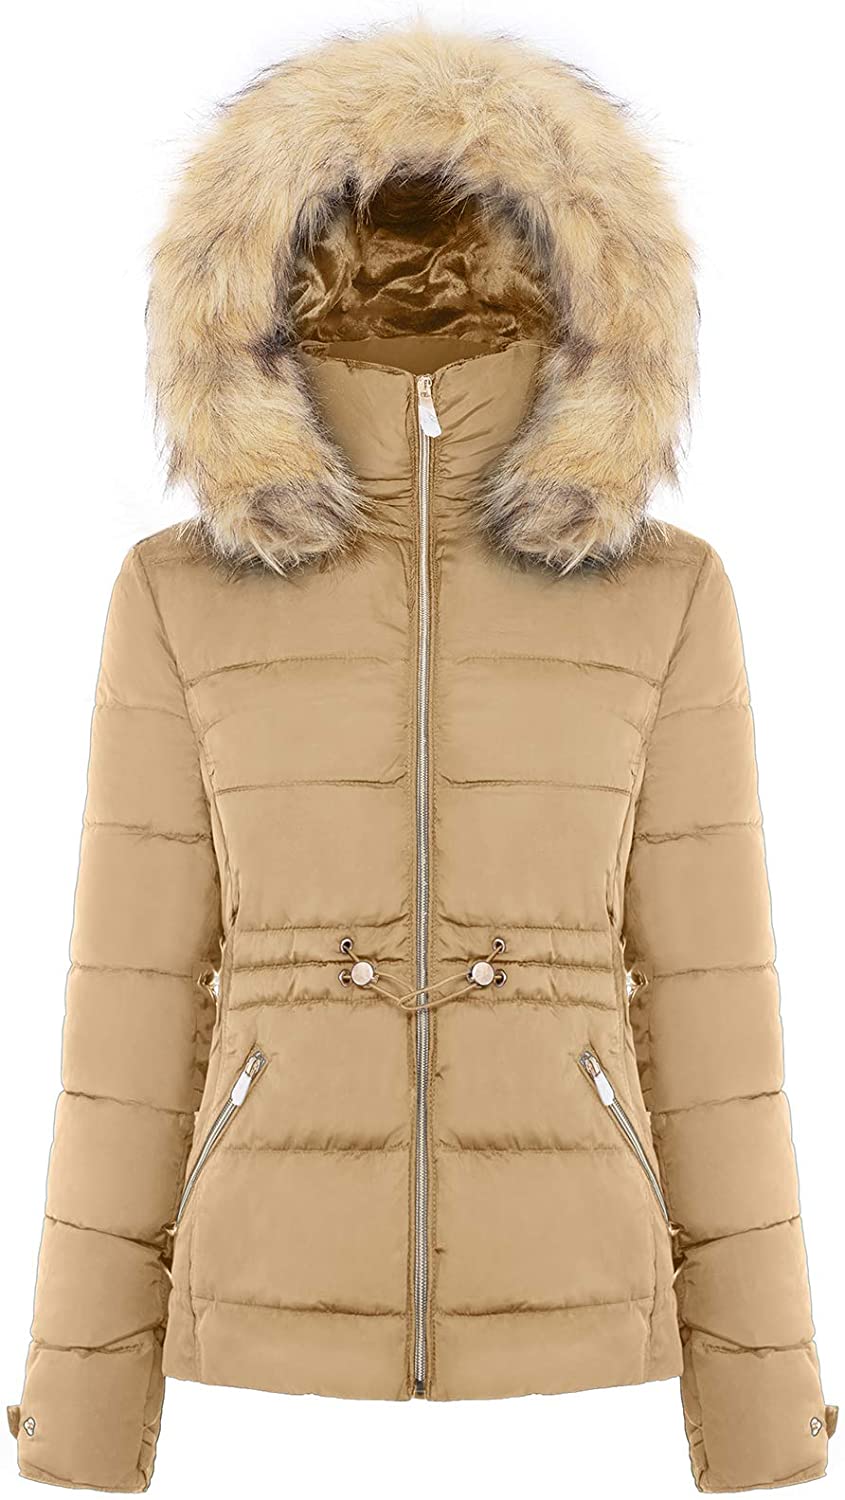 BodiLove Women\'s Jacket with Coat Quilted | Removable Faux Fur Puffer Short Winter eBay